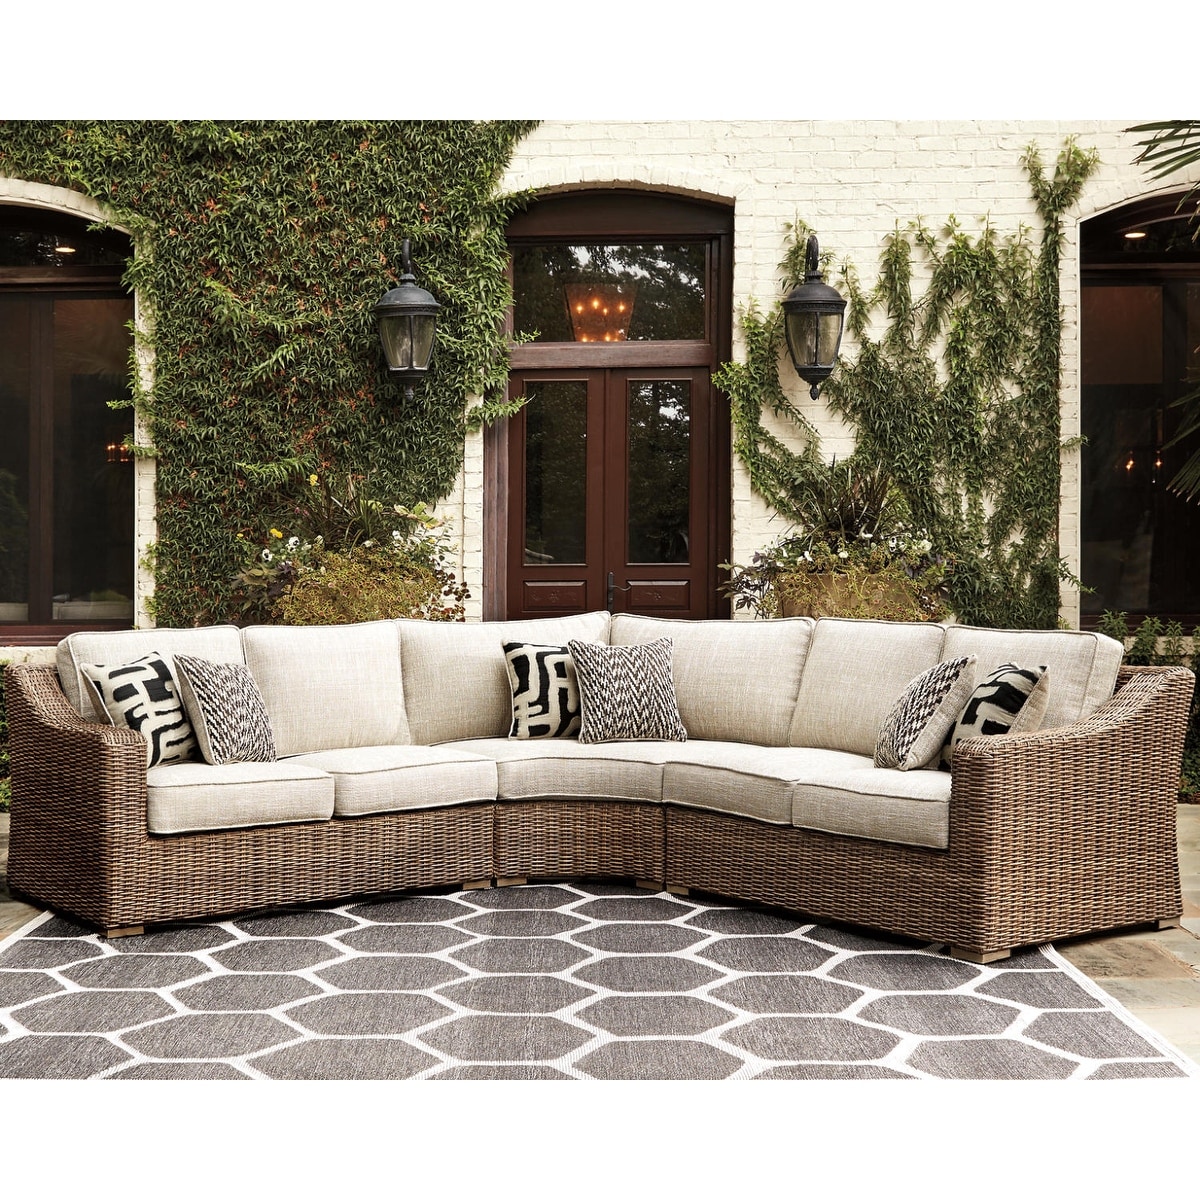 - Beyond Sale - Bed Ashley Bath Signature 26396066 Sectional Outdoor Beachcroft - by & Beige On Design